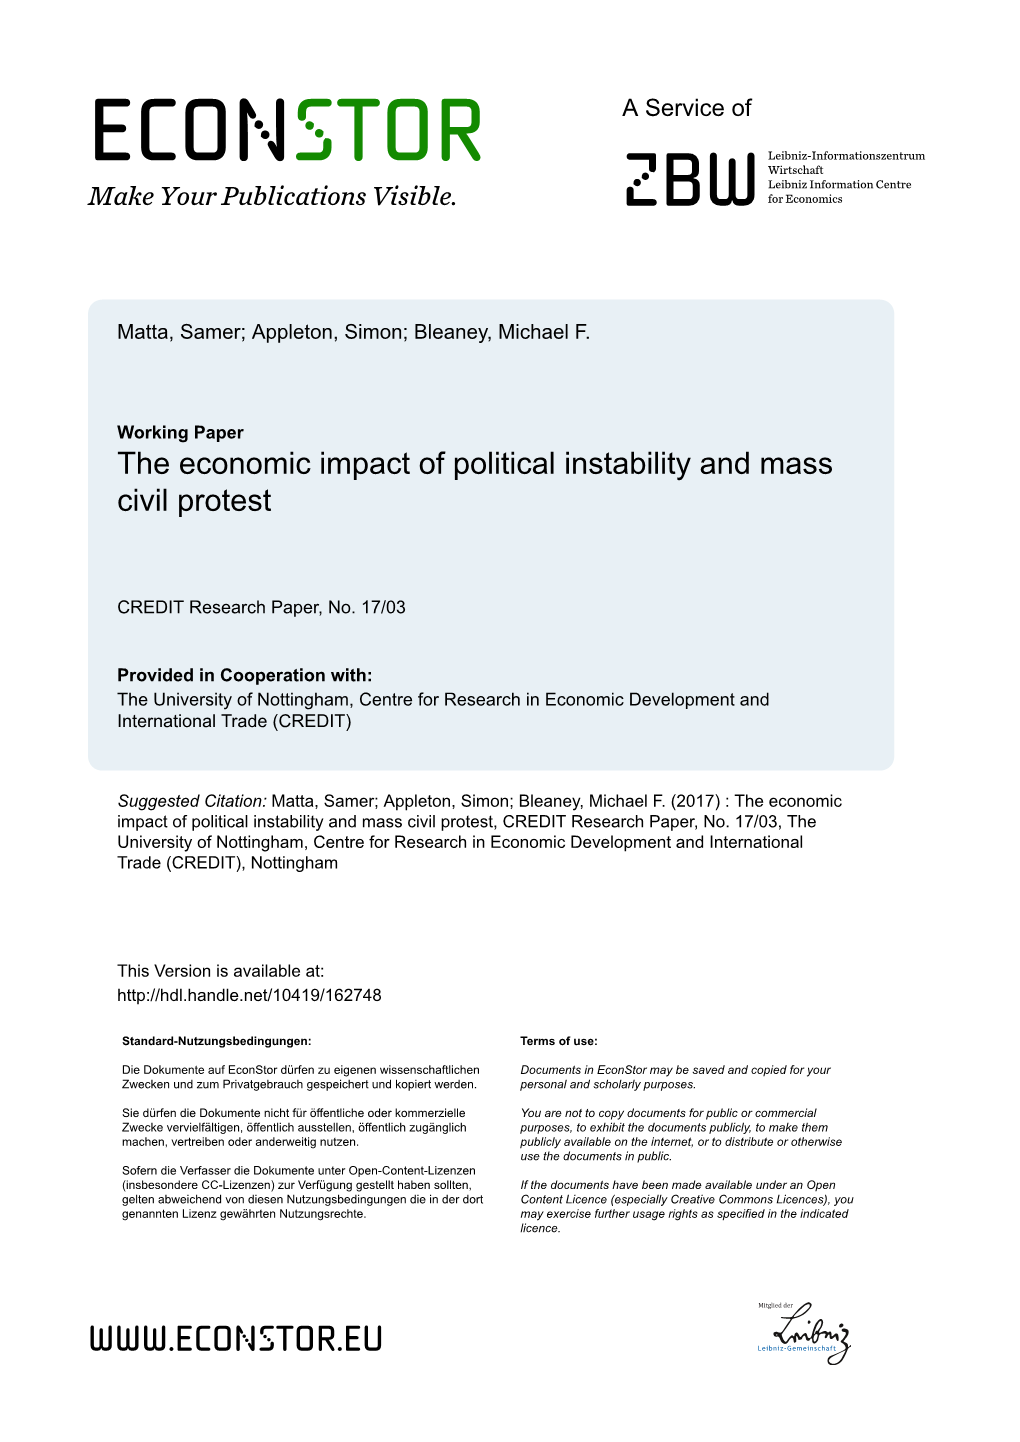 The Economic Impact of Political Instability and Mass Civil Protest